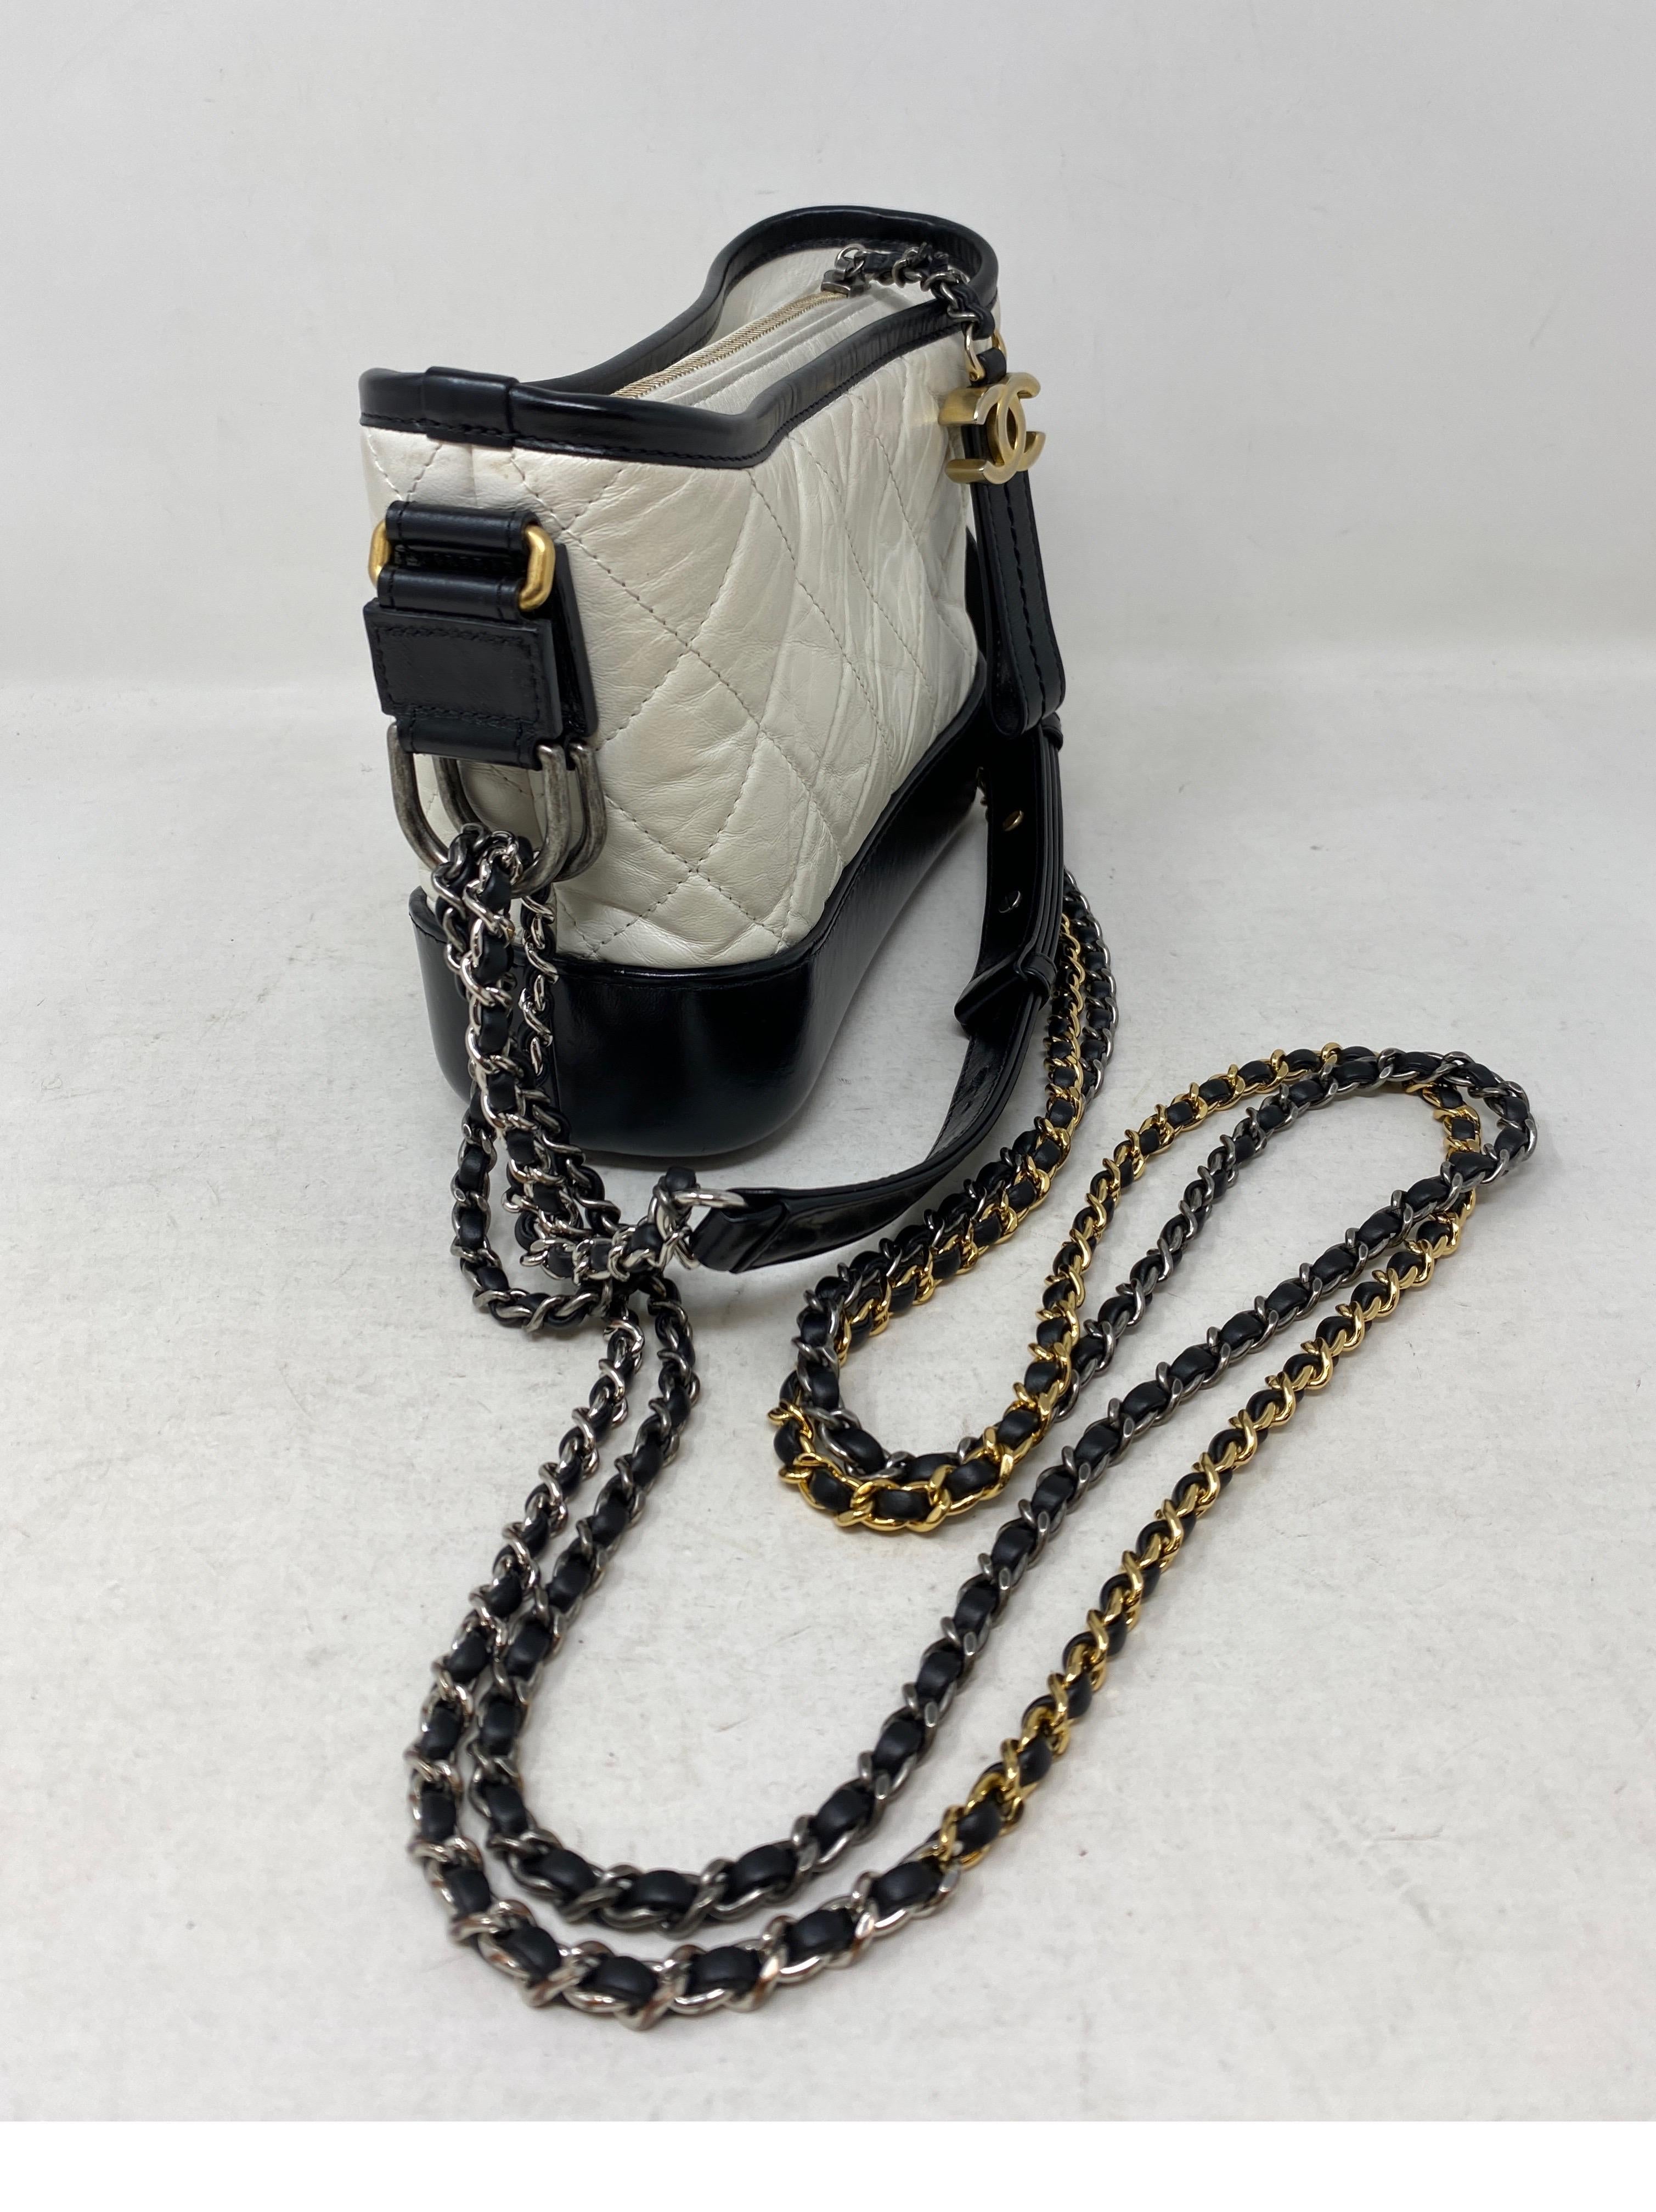 Chanel White and Black Gabrielle Bag. Good condition. Can be worn crossbody and as a shoulder bag. Small size Gabrielle bag. Includes authenticity card and dust bag. Guaranteed authentic. 